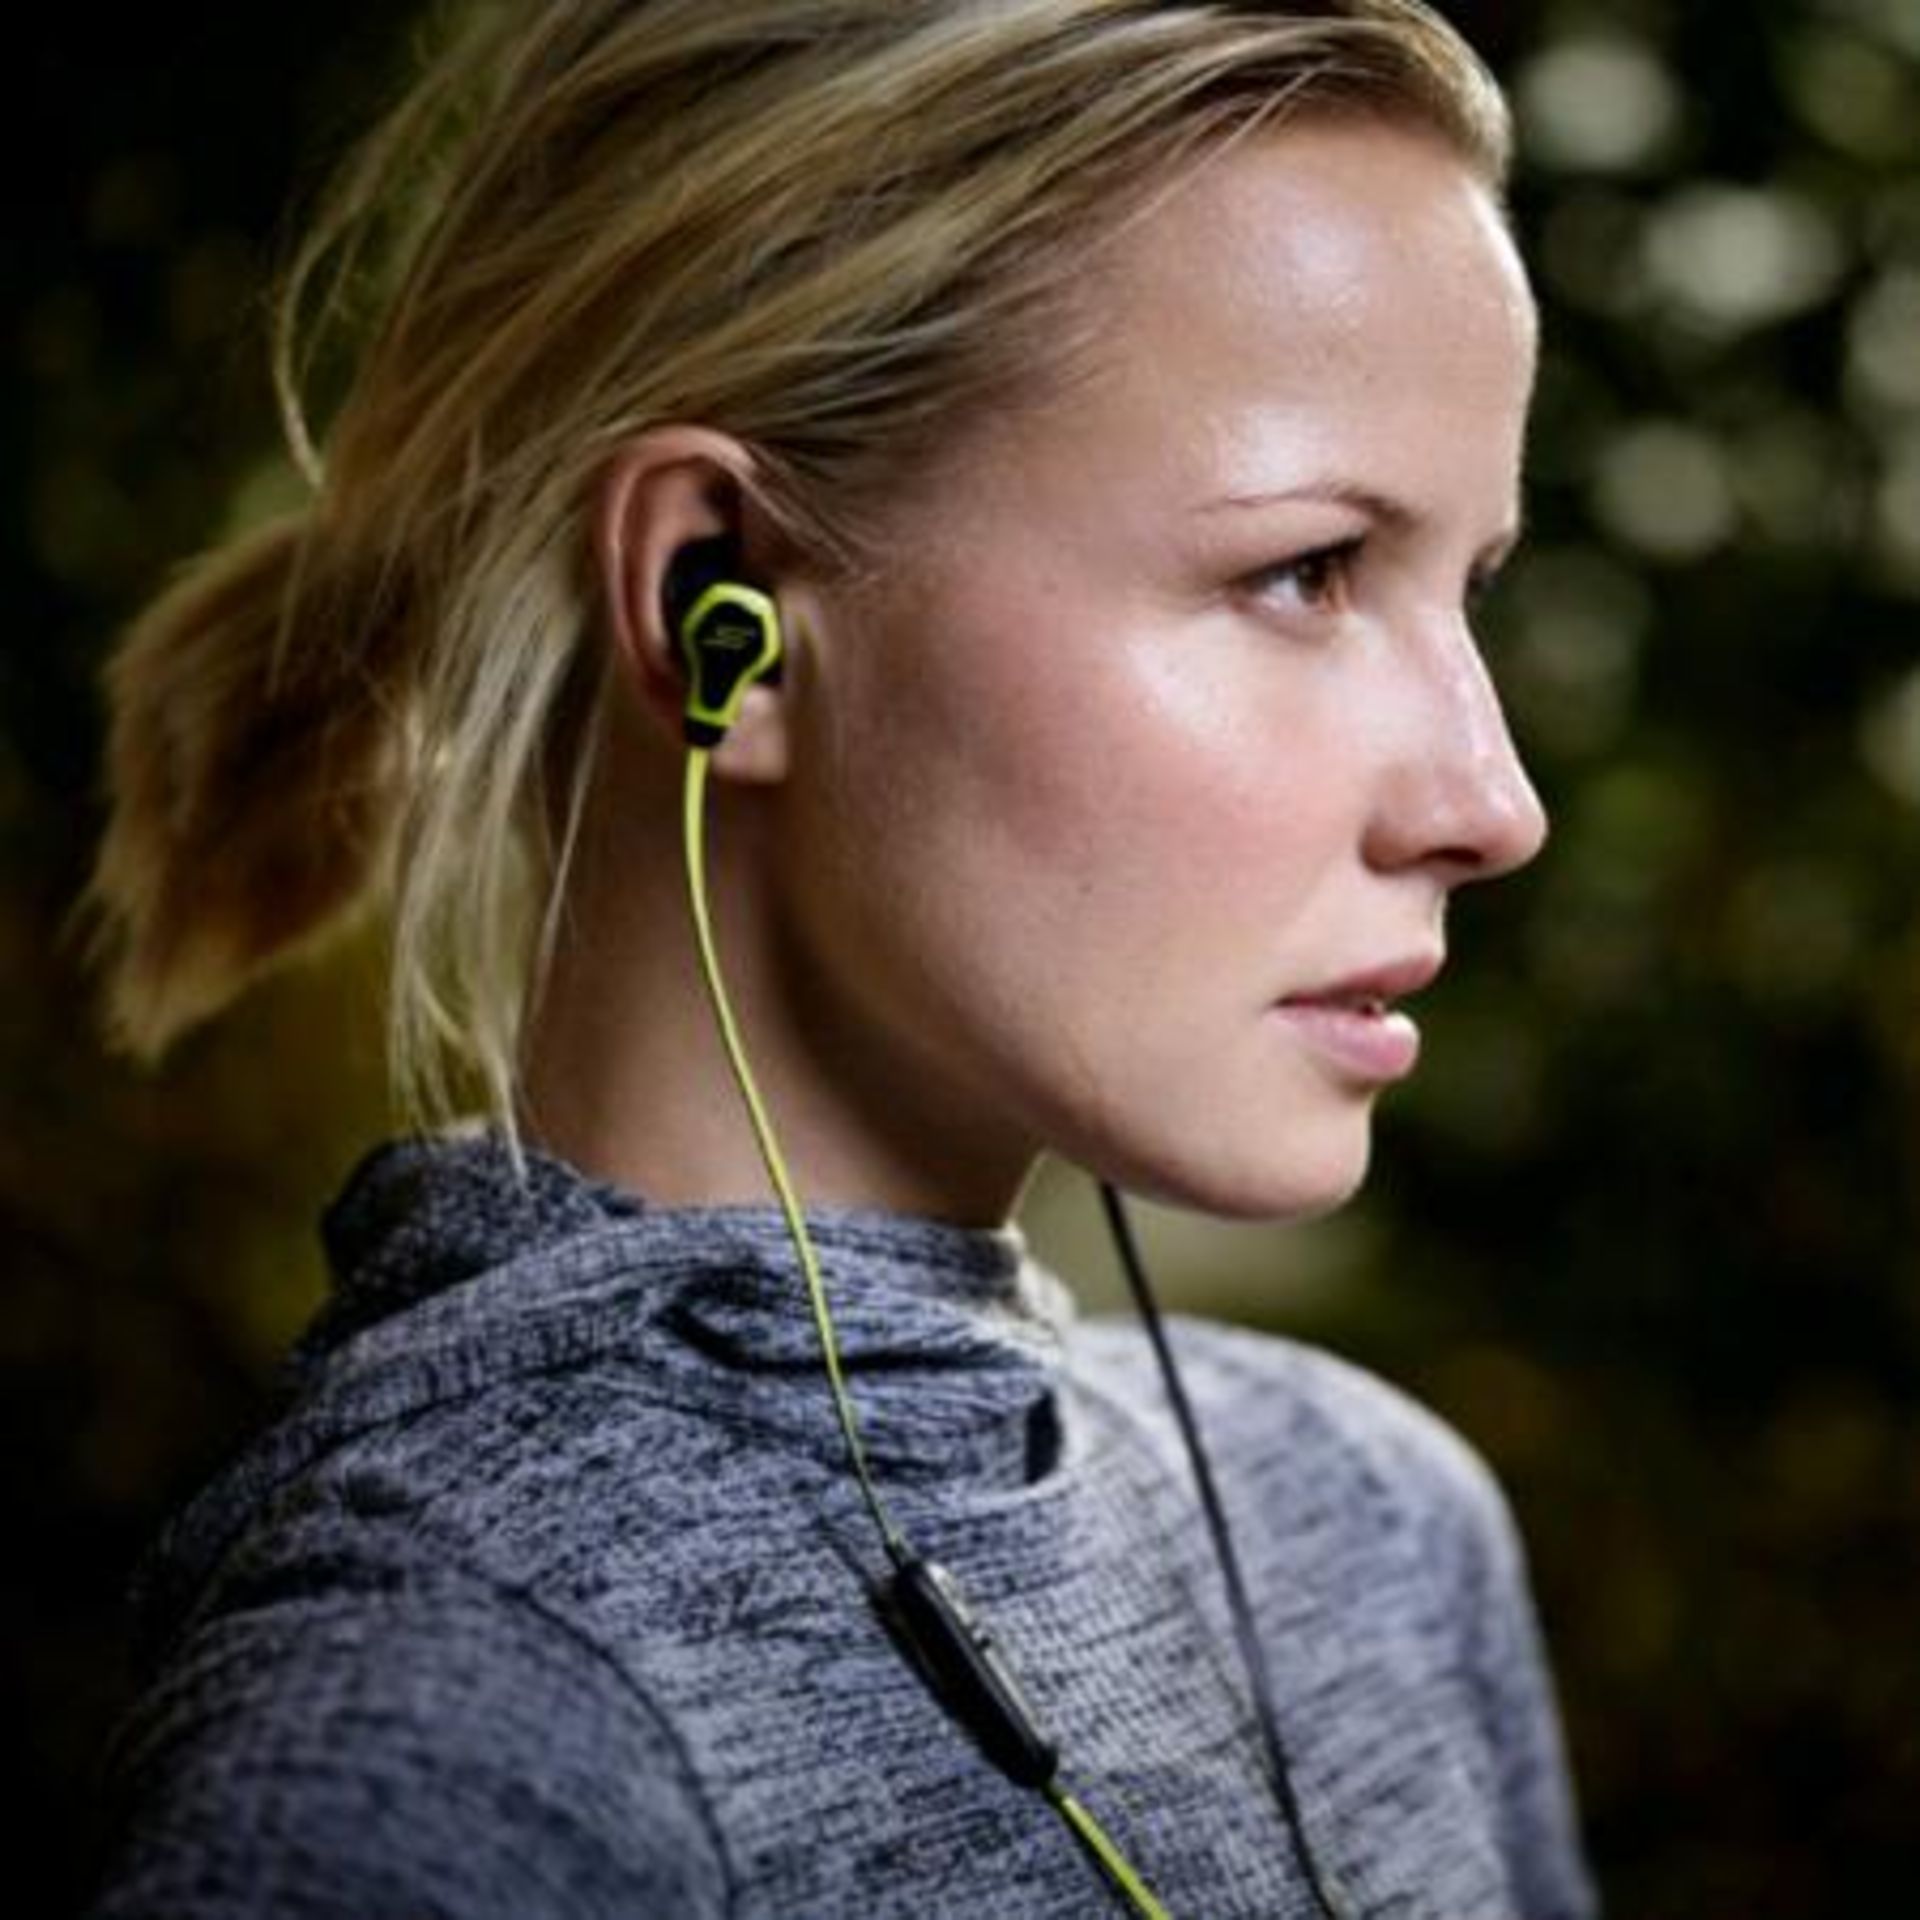 V Brand New SMS Audio BioSport Earphones - RRP £149.99 - Heart Rate Monitor Measures Changes In - Image 5 of 5